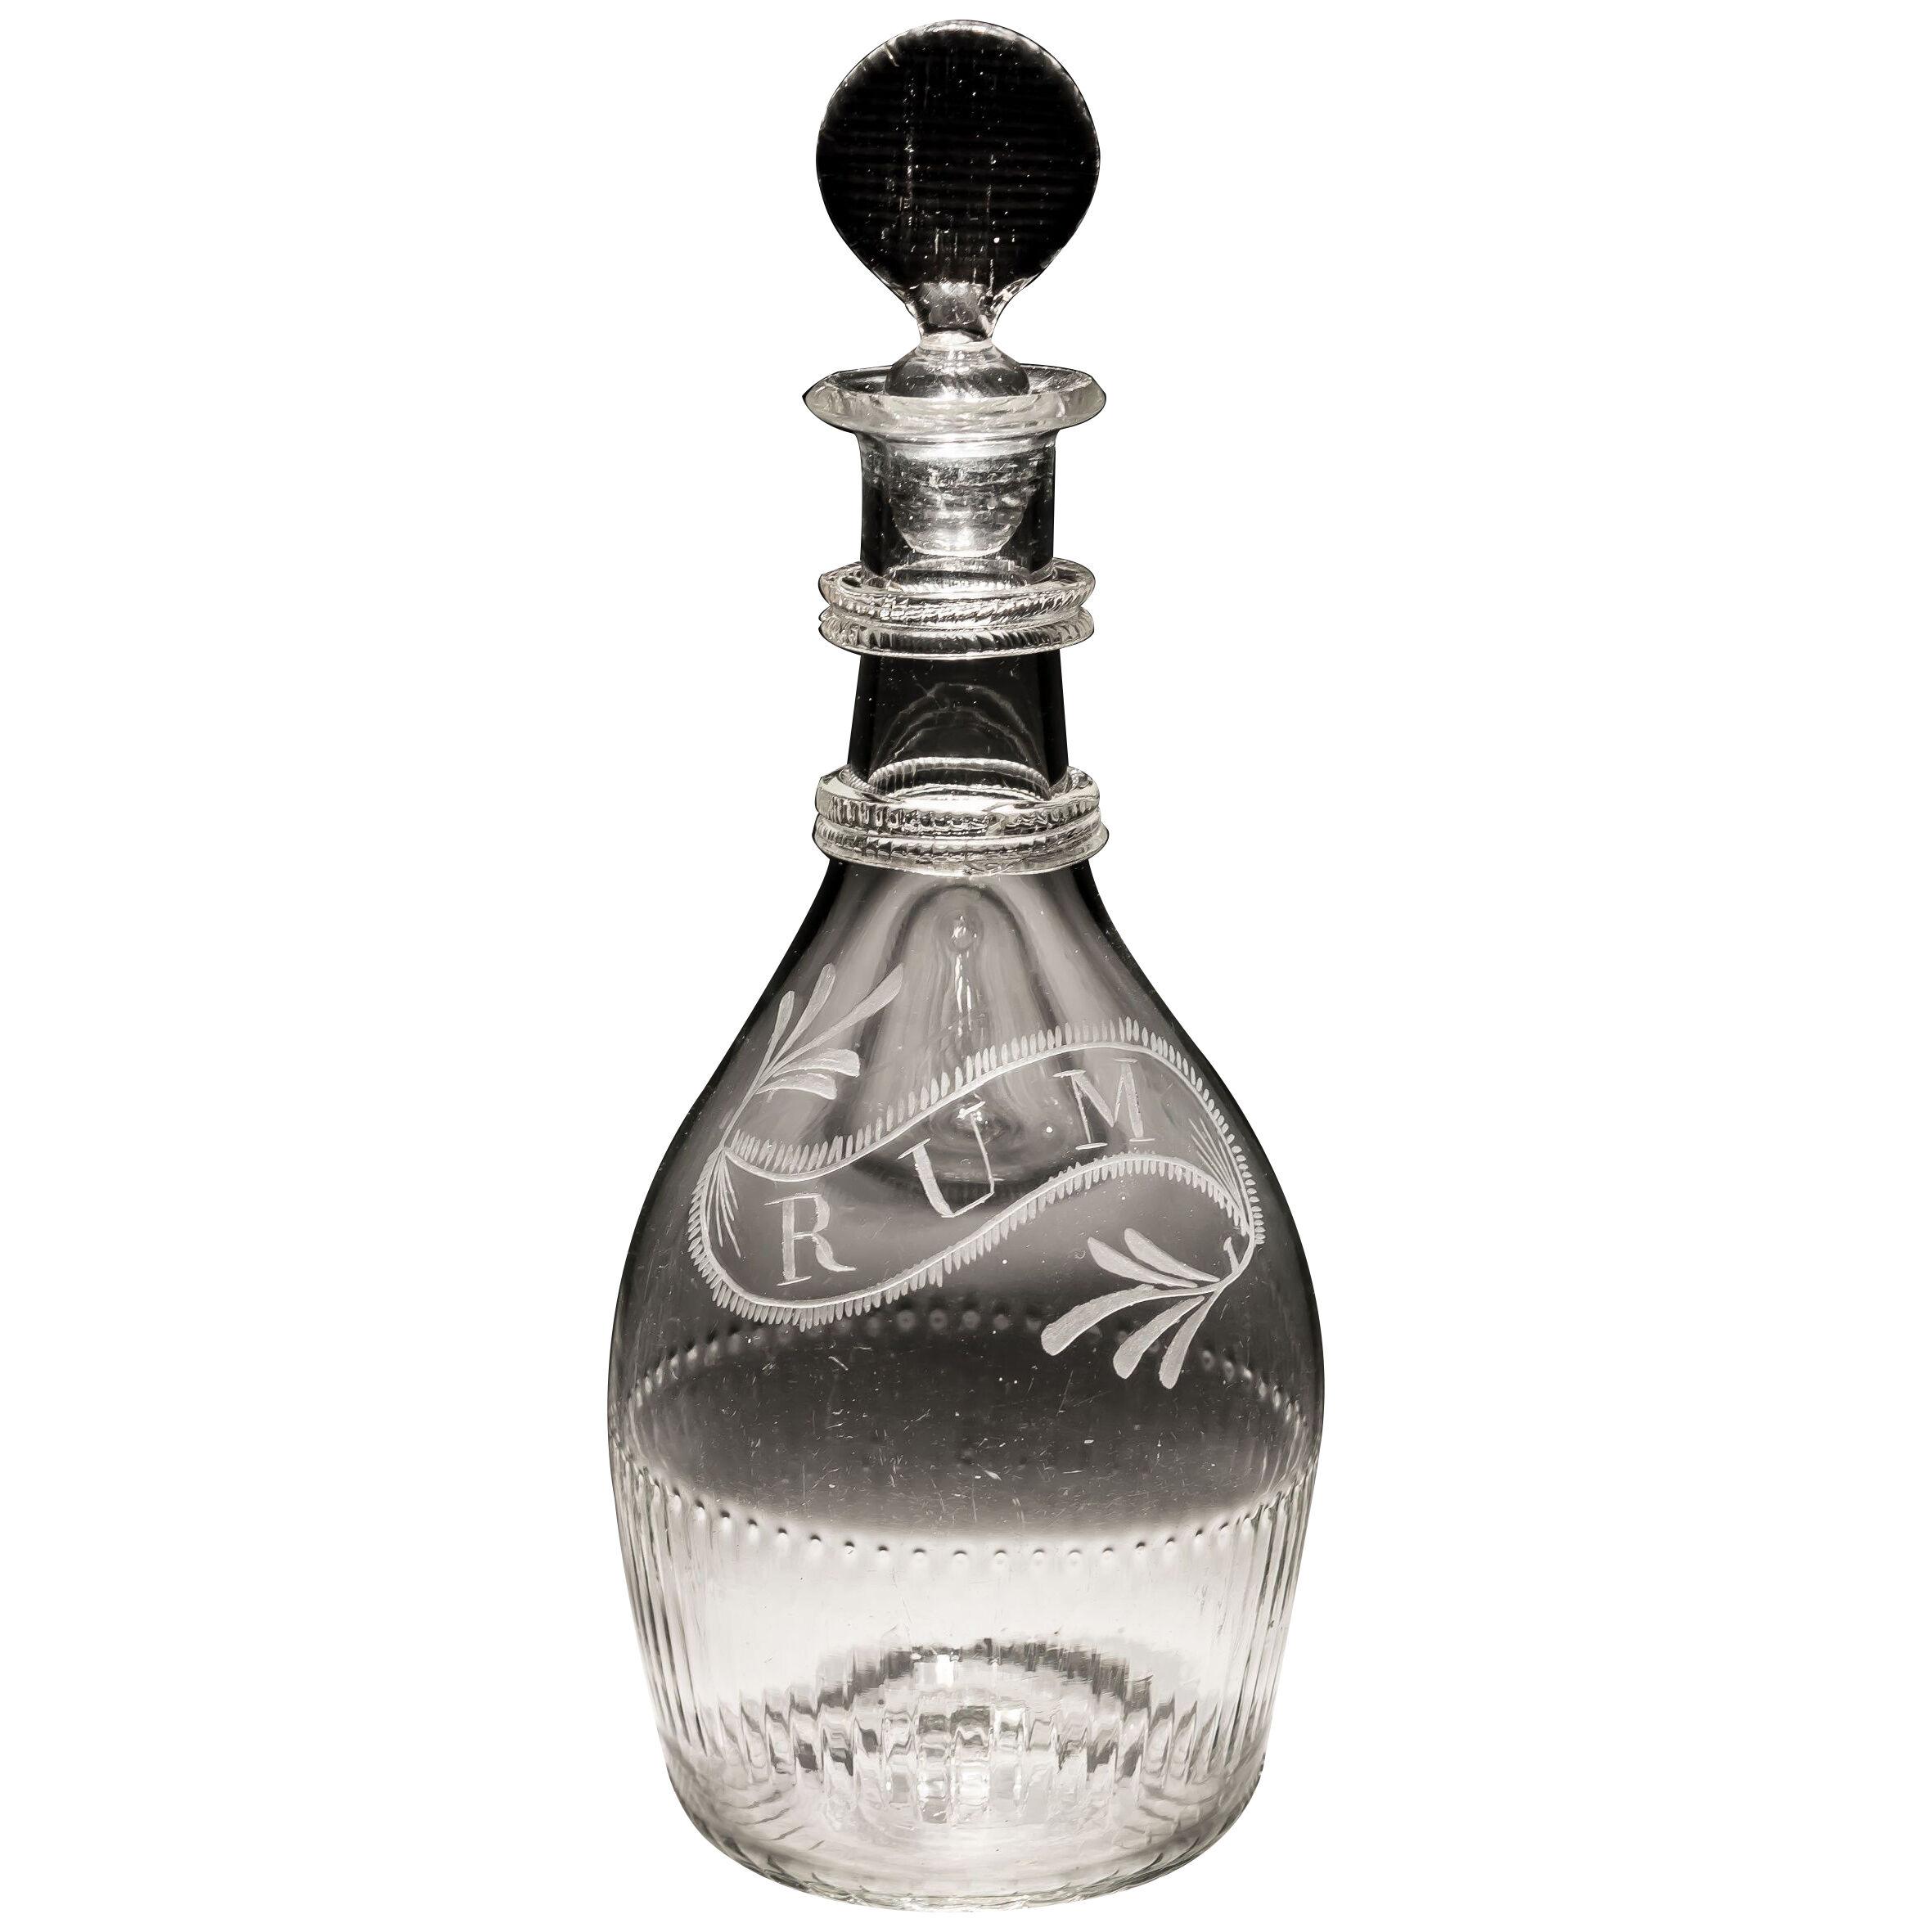 An Engraved Irish Rum Decanter Attributed to Cork & Co	